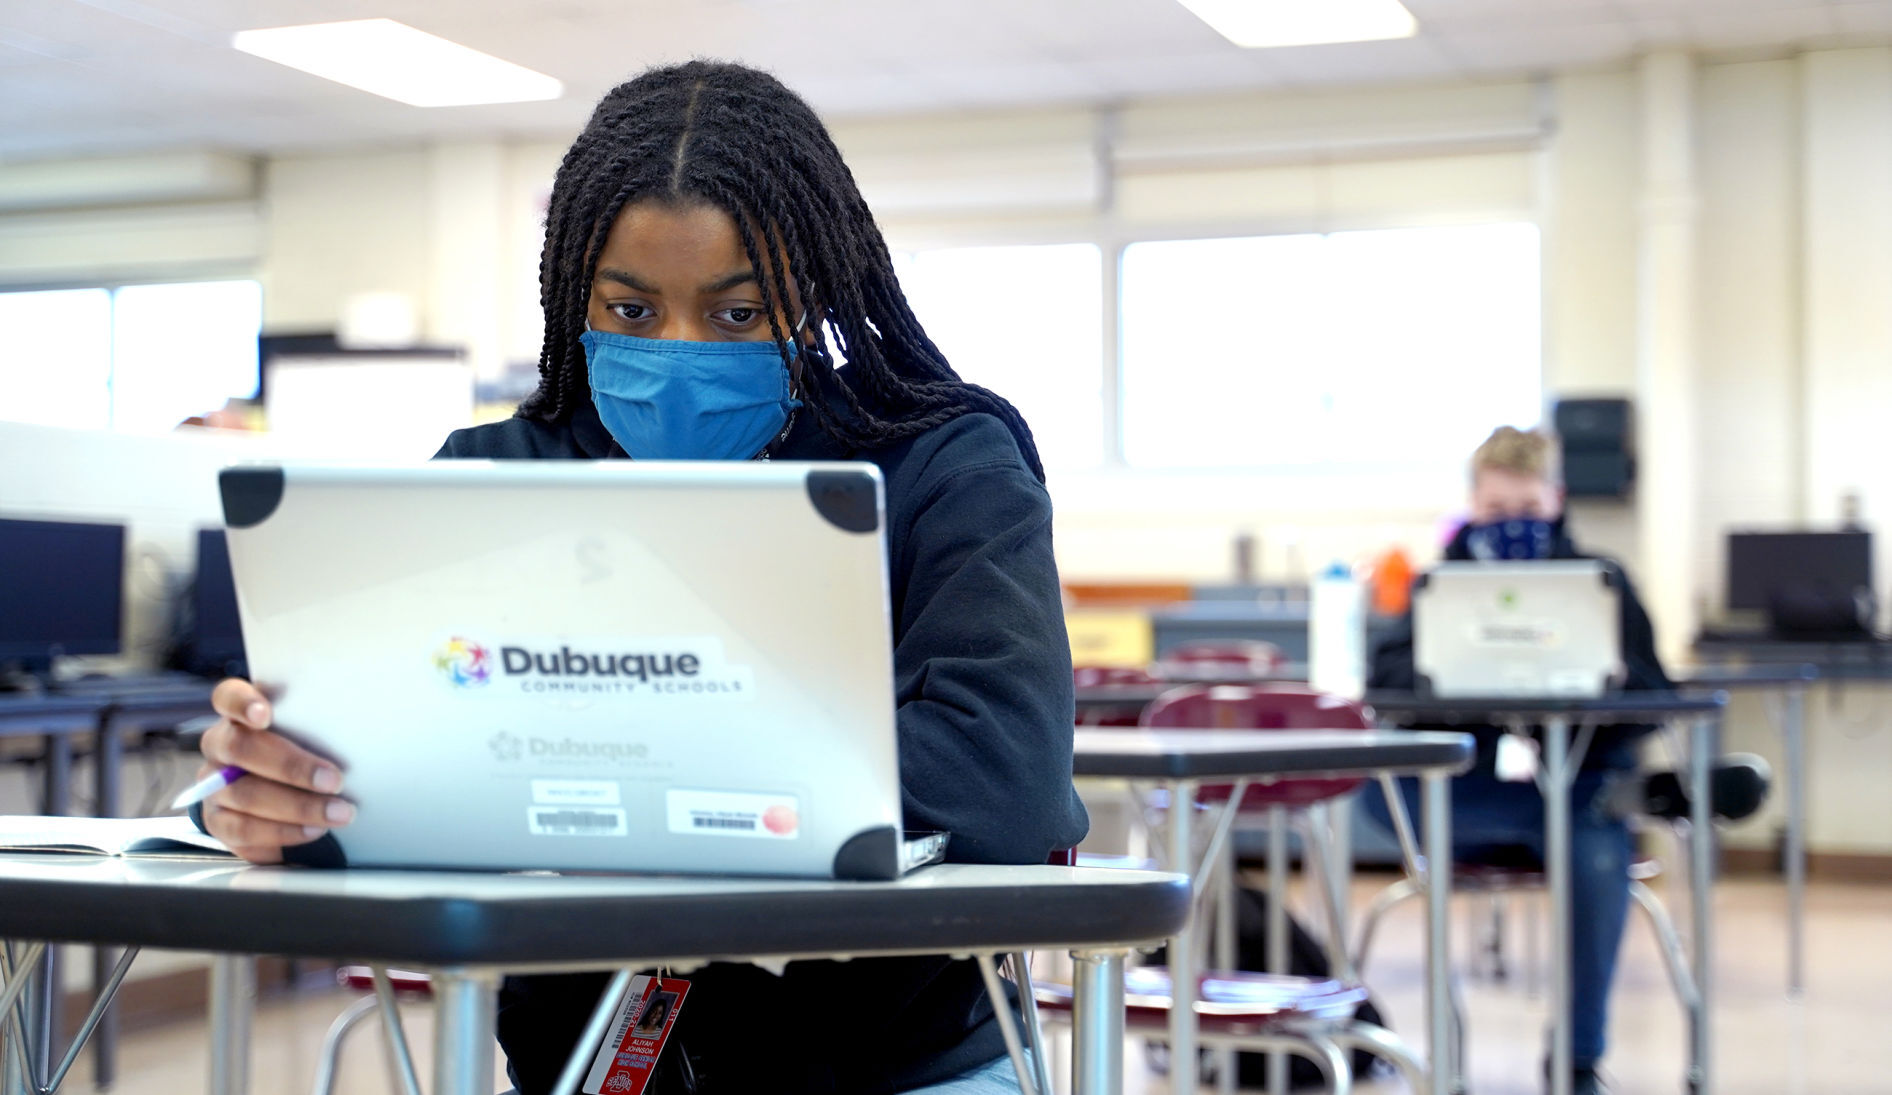 Aliyah Johnson, a junior at Dubuque Senior High School, attends an Advanced Placement computer science course at the school on Tuesday. She said she has long had an interest in computer coding. PHOTO CREDIT: Paul Kurutsides